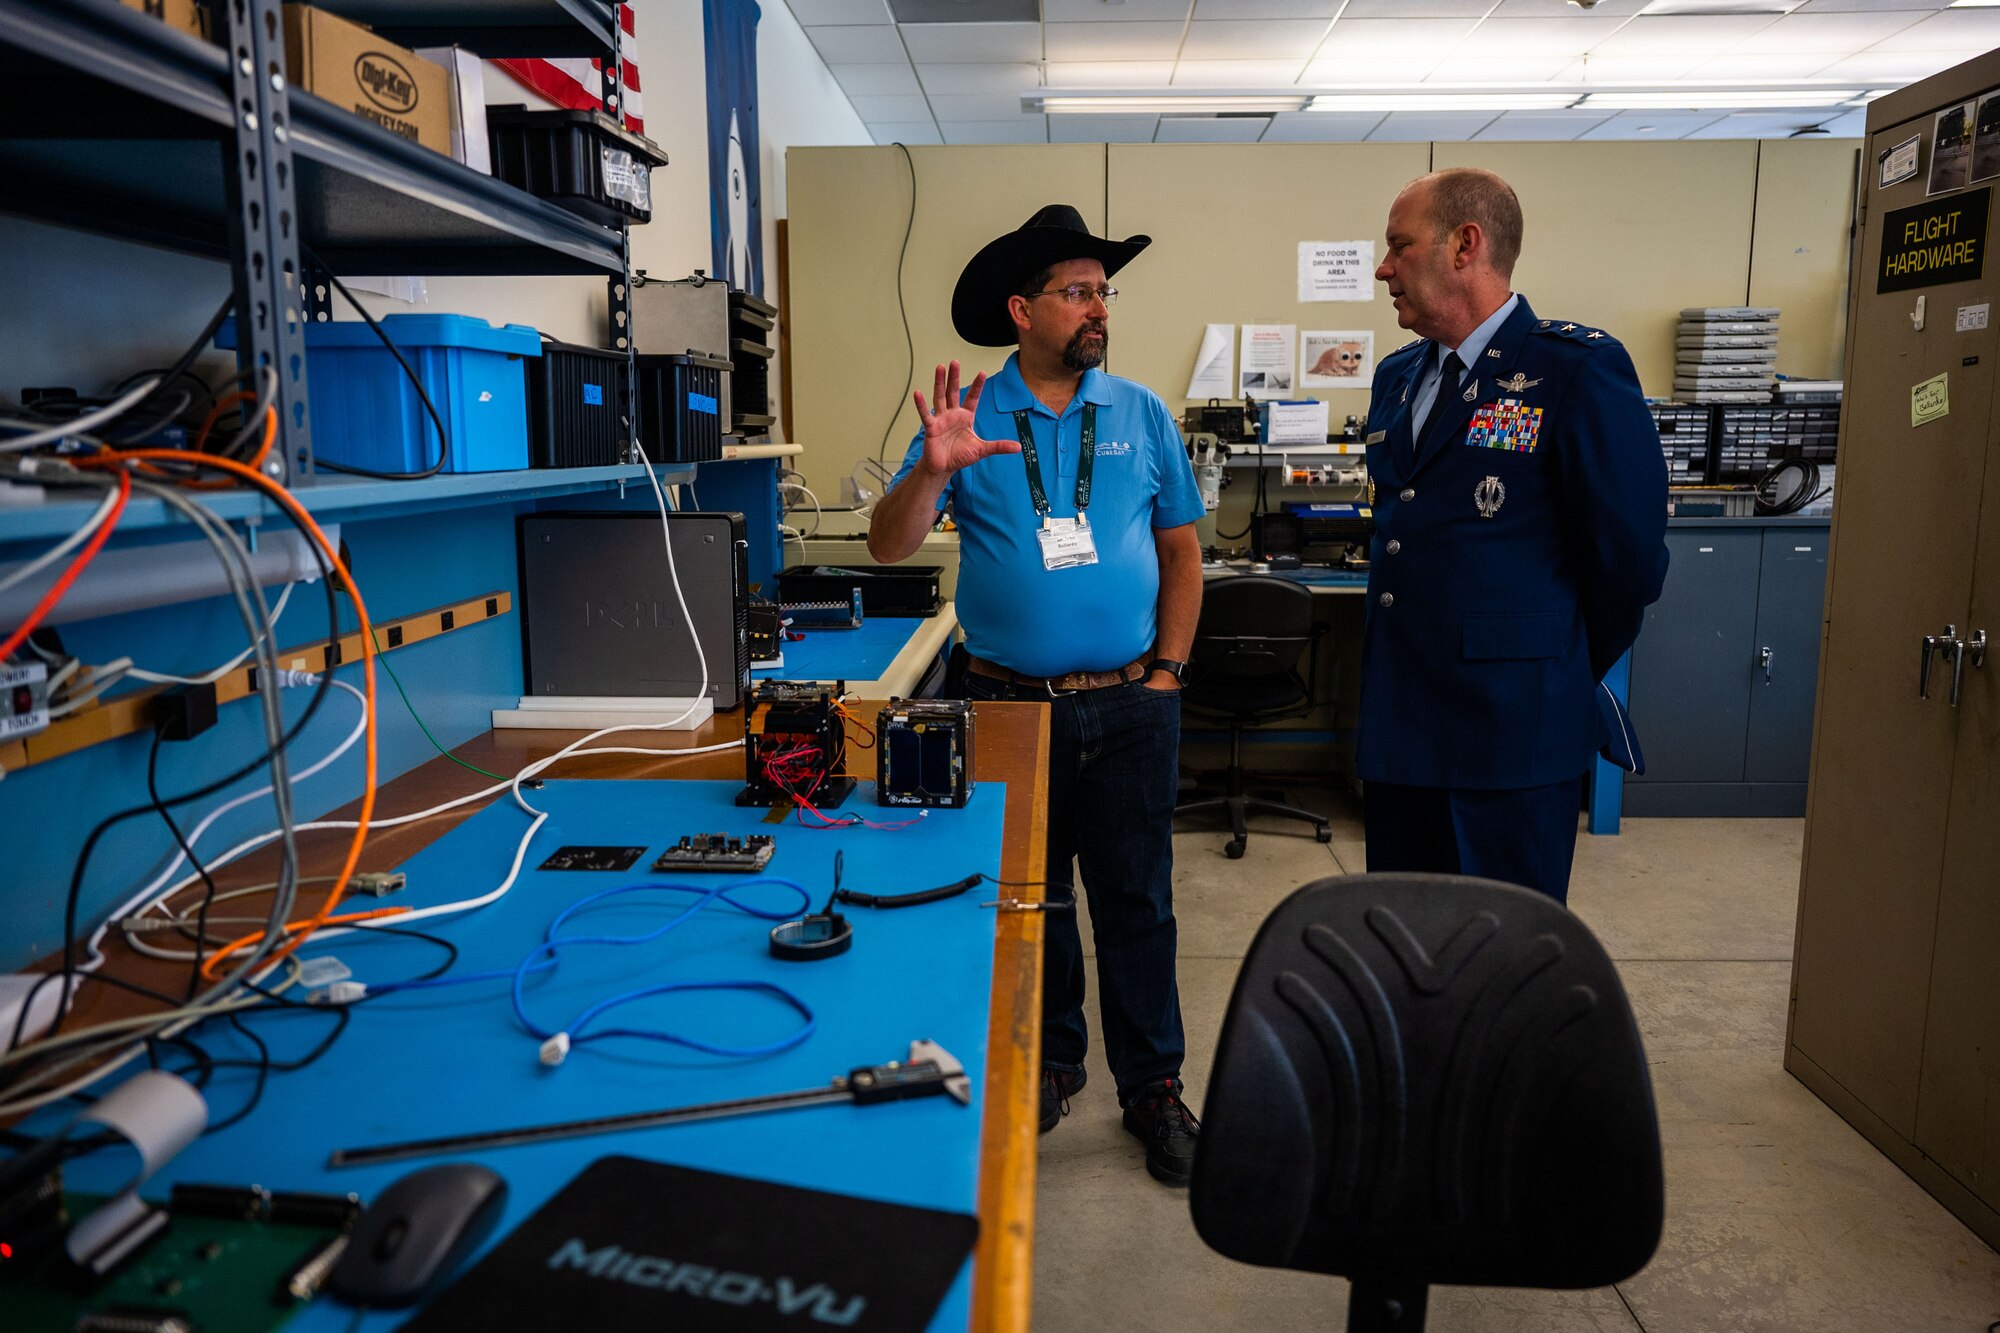 Dr. John Bellardo, Cal Poly CubeSat Laboratory Director, left, explains current student-developed satellite projects to U.S. Space Force Maj. Gen. Douglas A. Schiess, Combined Force Space Component Command commander, at California Polytechnic State University in San Luis Obispo, Calif., April 25, 2023. The Cal Poly CubeSat Laboratory is part of PolySat, a student-run, multidisciplinary independent research lab at the university which partnered with Vandenberg through a Cooperative Research and Development Agreement (CRADA) in 2019, the first of its kind between the base and an academic institution. A CRADA is a no-cost collaboration that enables the transfer and exchange of technology and professional expertise. (U.S. Space Force photo by Tech. Sgt. Luke Kitterman)